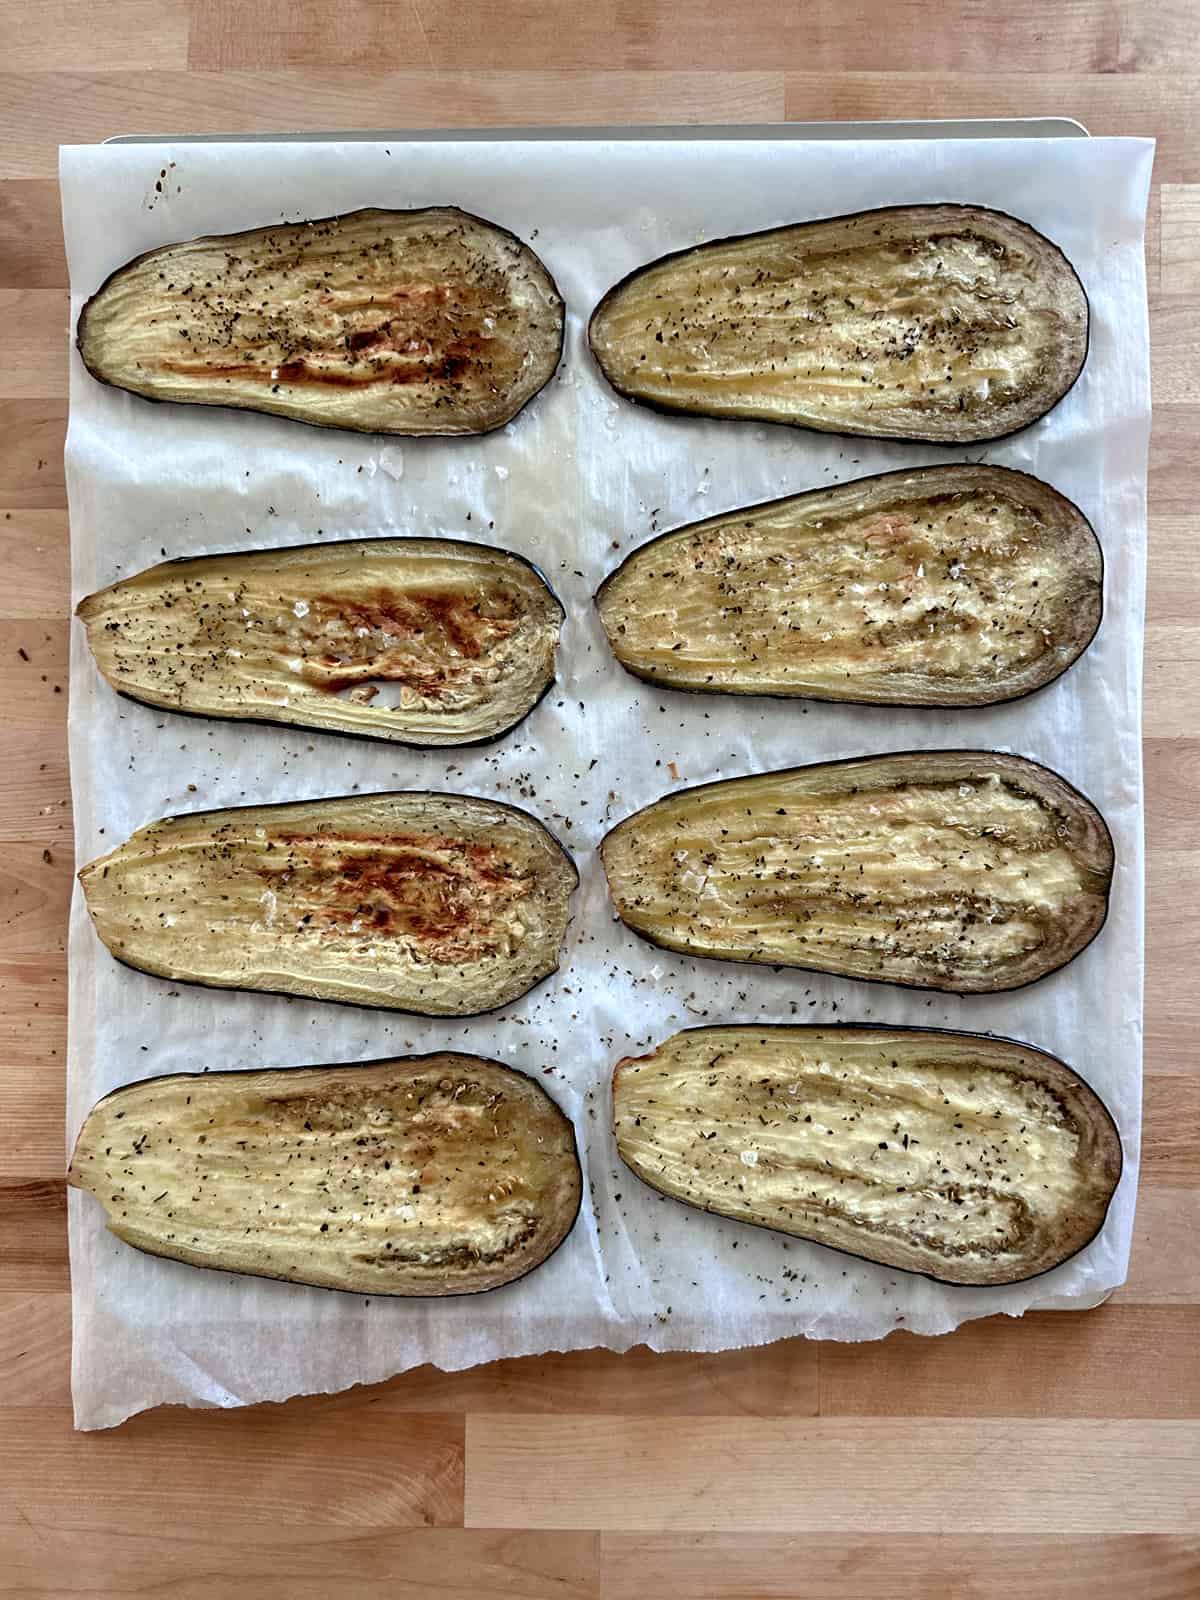 A baking sheet lined with parchment paper and cooked eggplant slices.